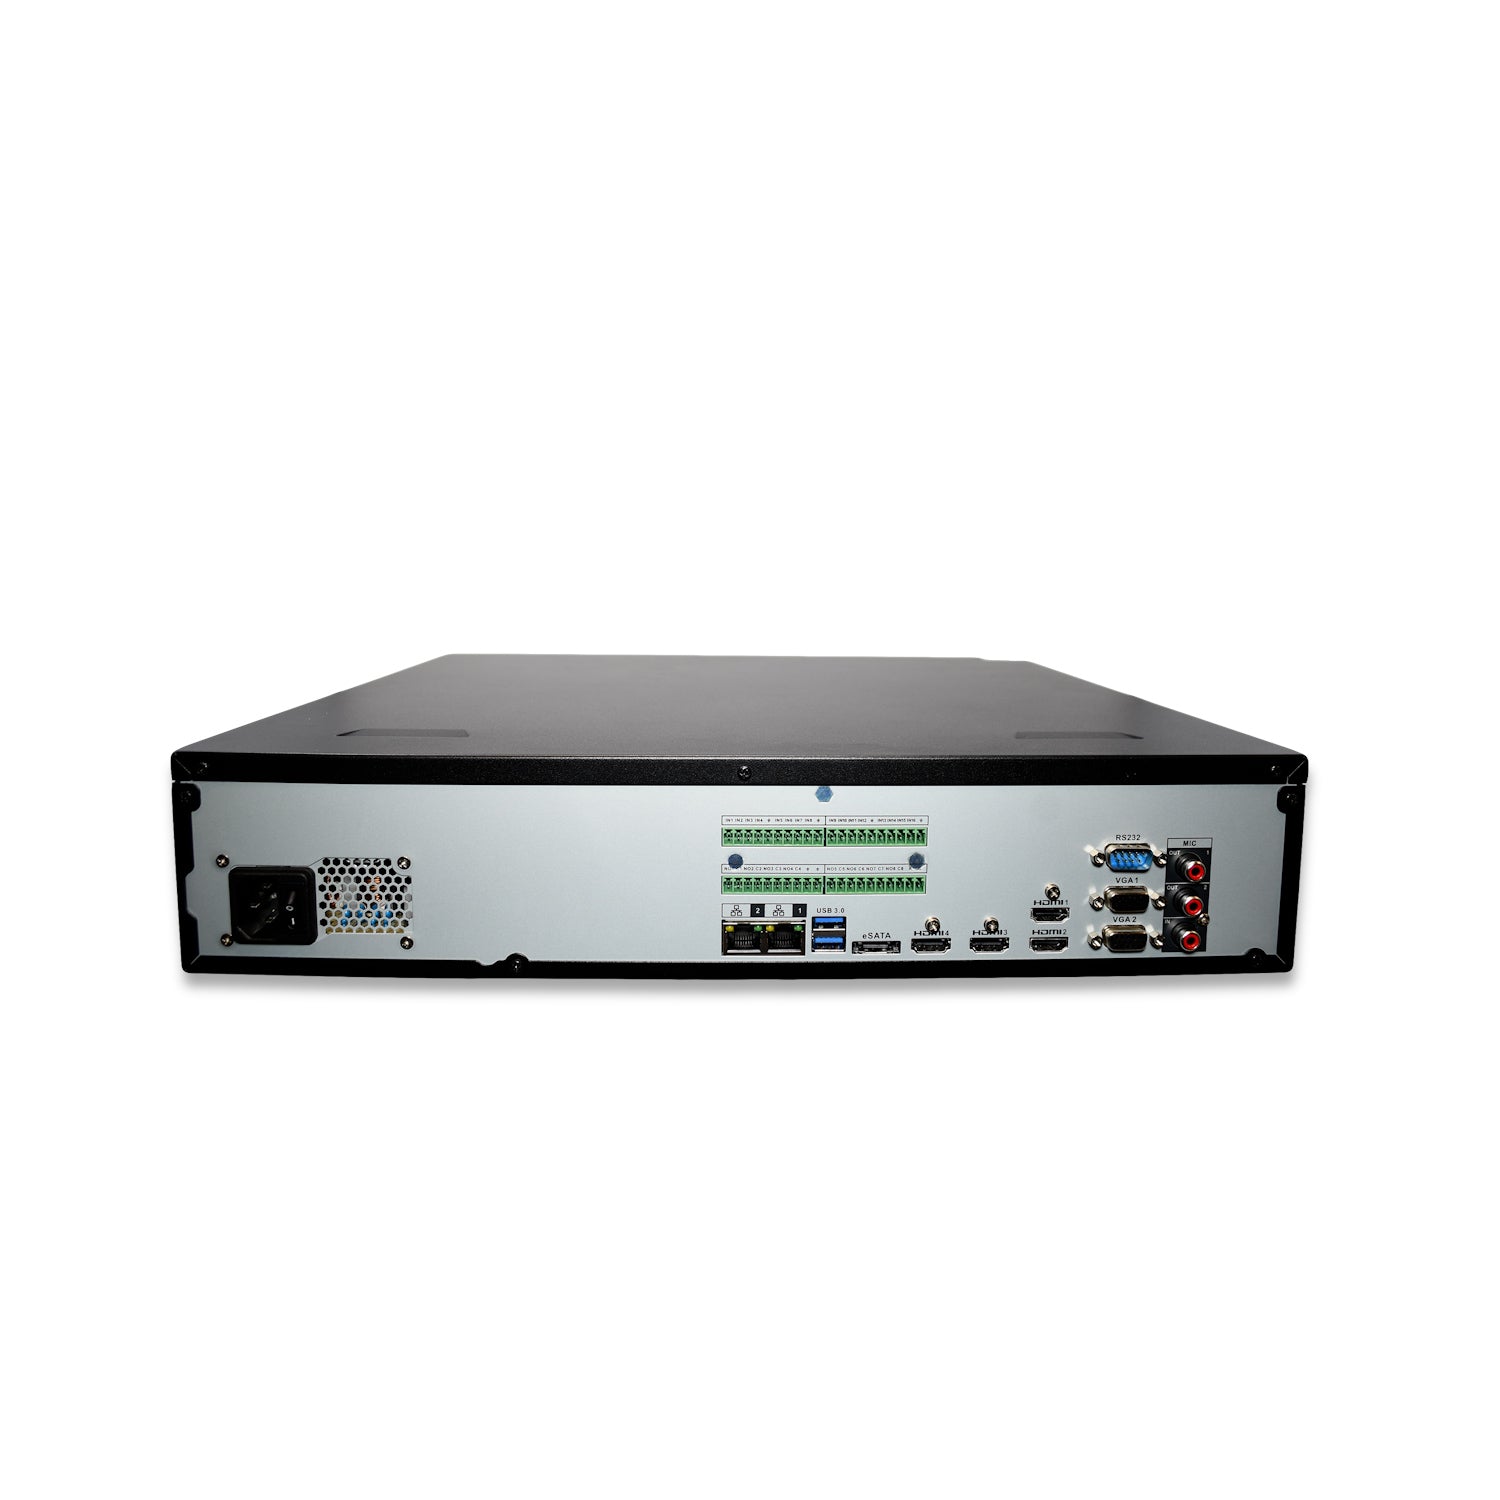 MNR68064-AI | 64 Channel 4K H.265+ Ultra-AI NVR with 160TB (8x20TB) HDD Max Internal Capacity, eSATA Expandable - HDDs Not Included - Montavue